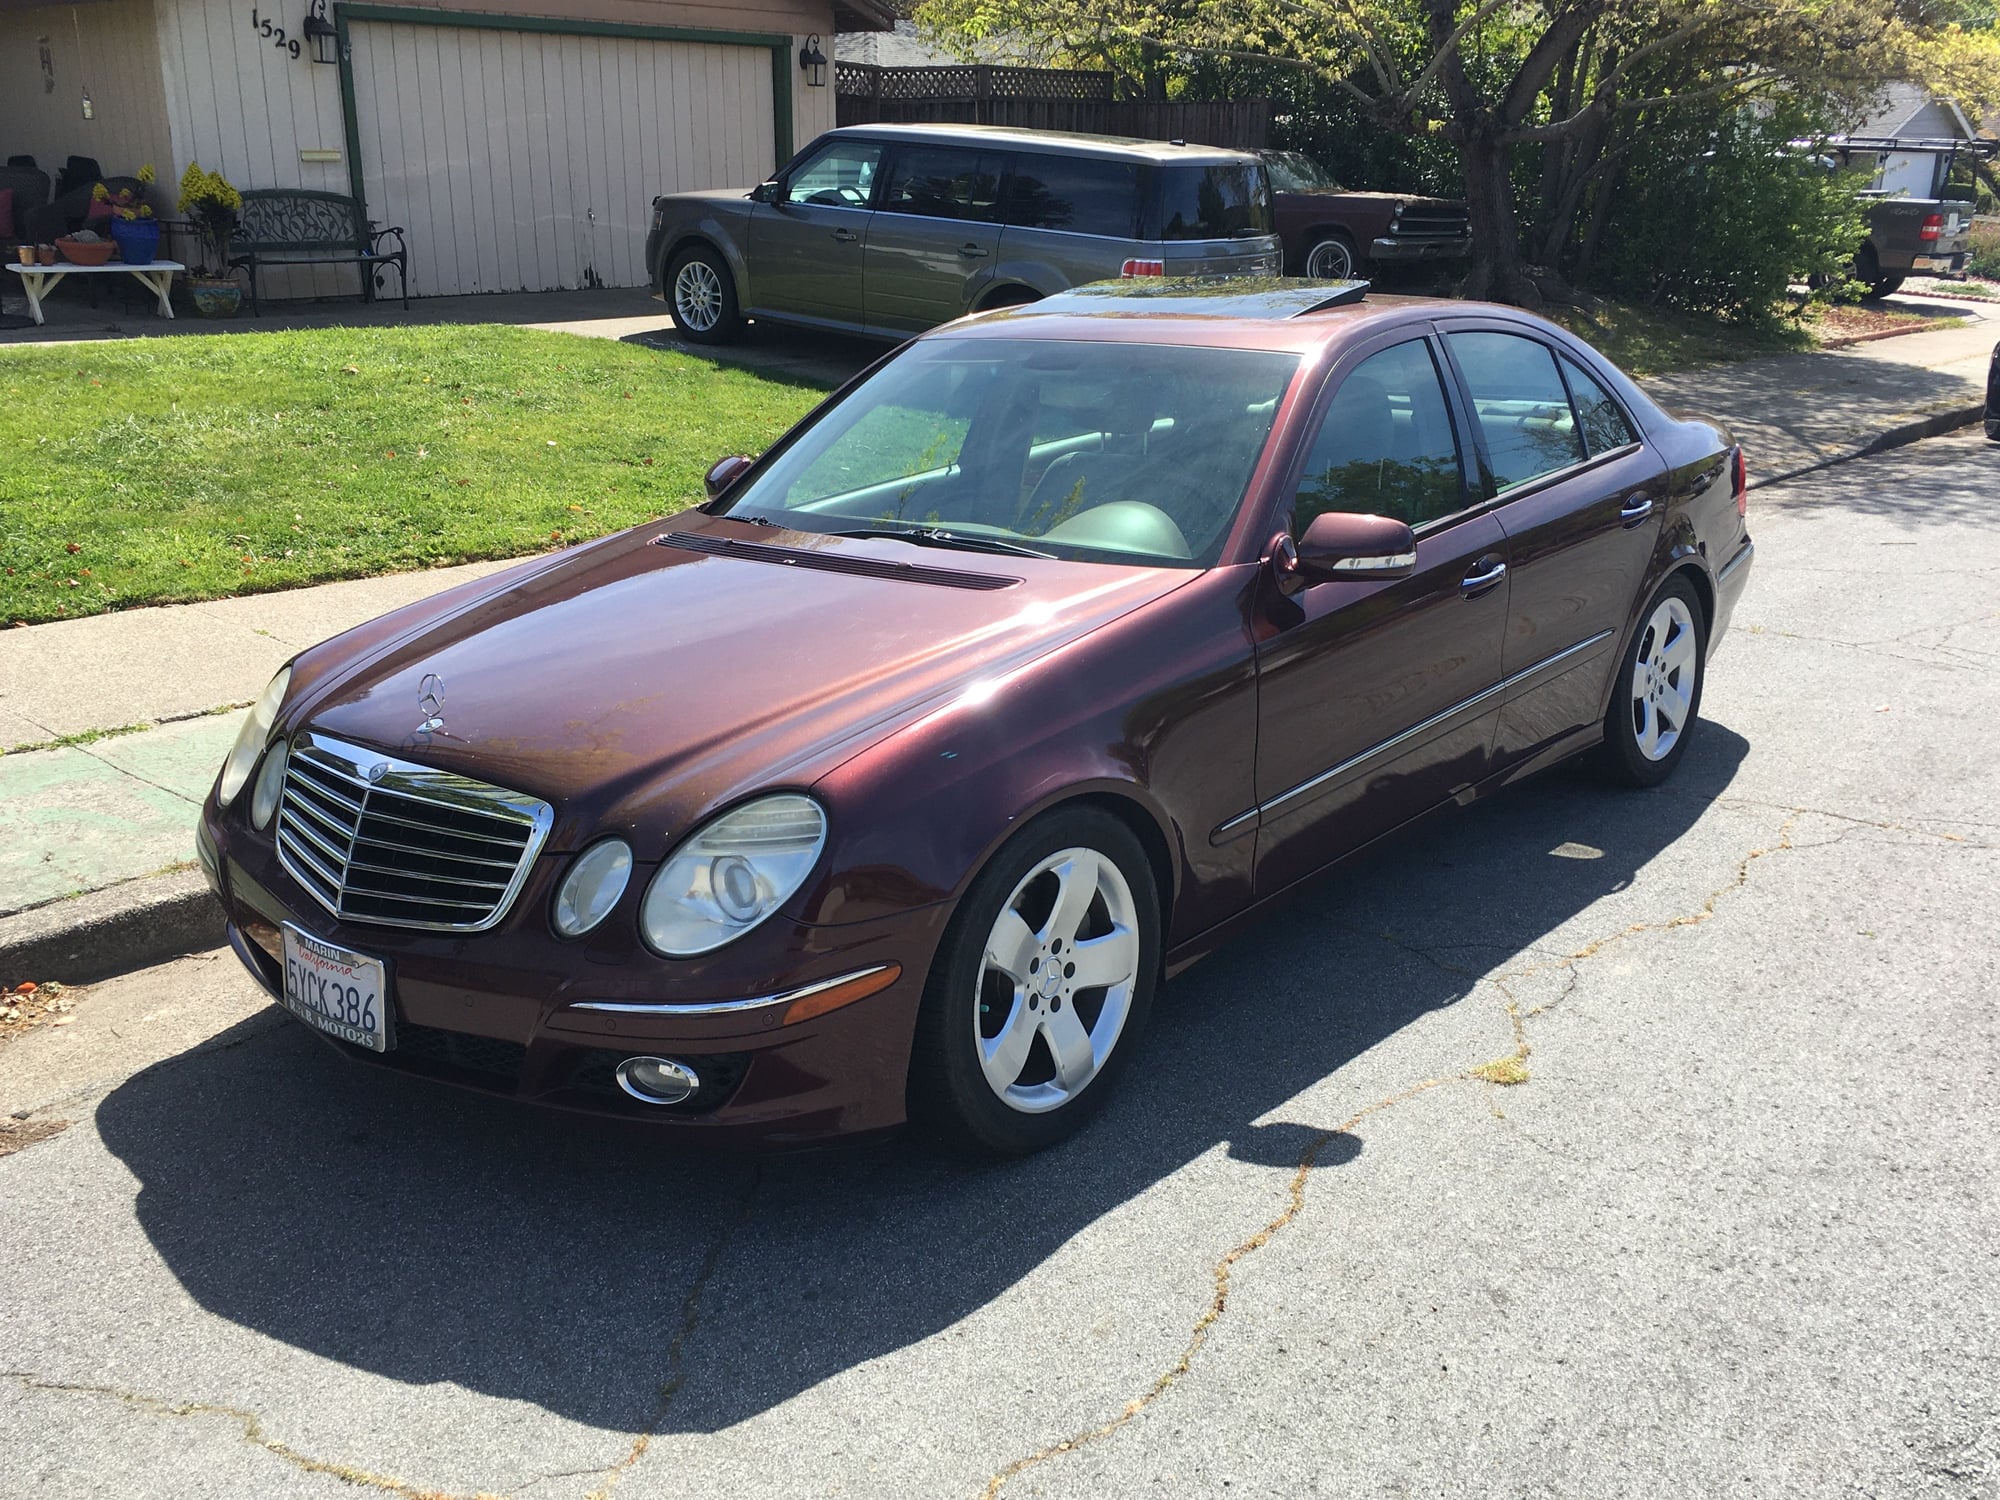 2007 Mercedes-Benz E550 - E550 Sedan 2007 - Highly Optioned - 382HP - 26MPG - Only $4,995 - Used - VIN WDBUF72X678044892 - 8 cyl - 2WD - Automatic - Sedan - Red - Novato, CA 94947, United States